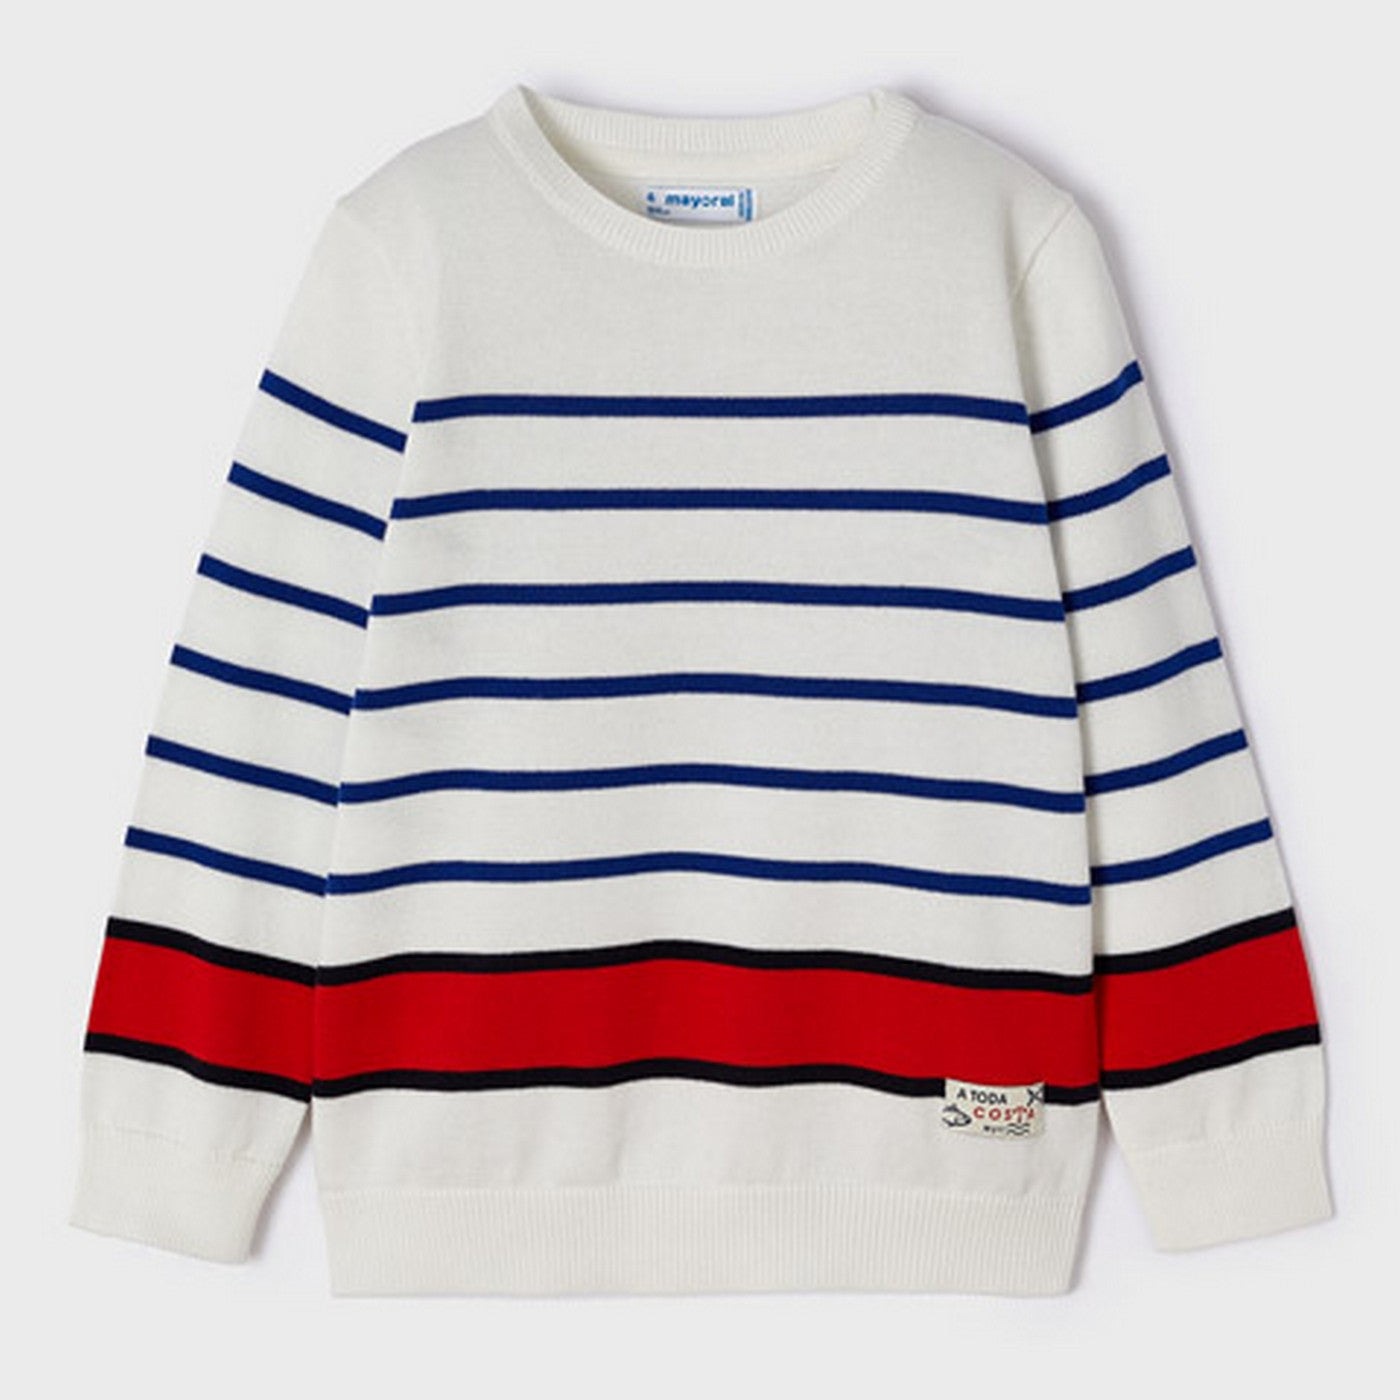 Maglioncino Bianco A Righe In Cotone Bambino MAYORAL 3337 - MAYORAL - LuxuryKids